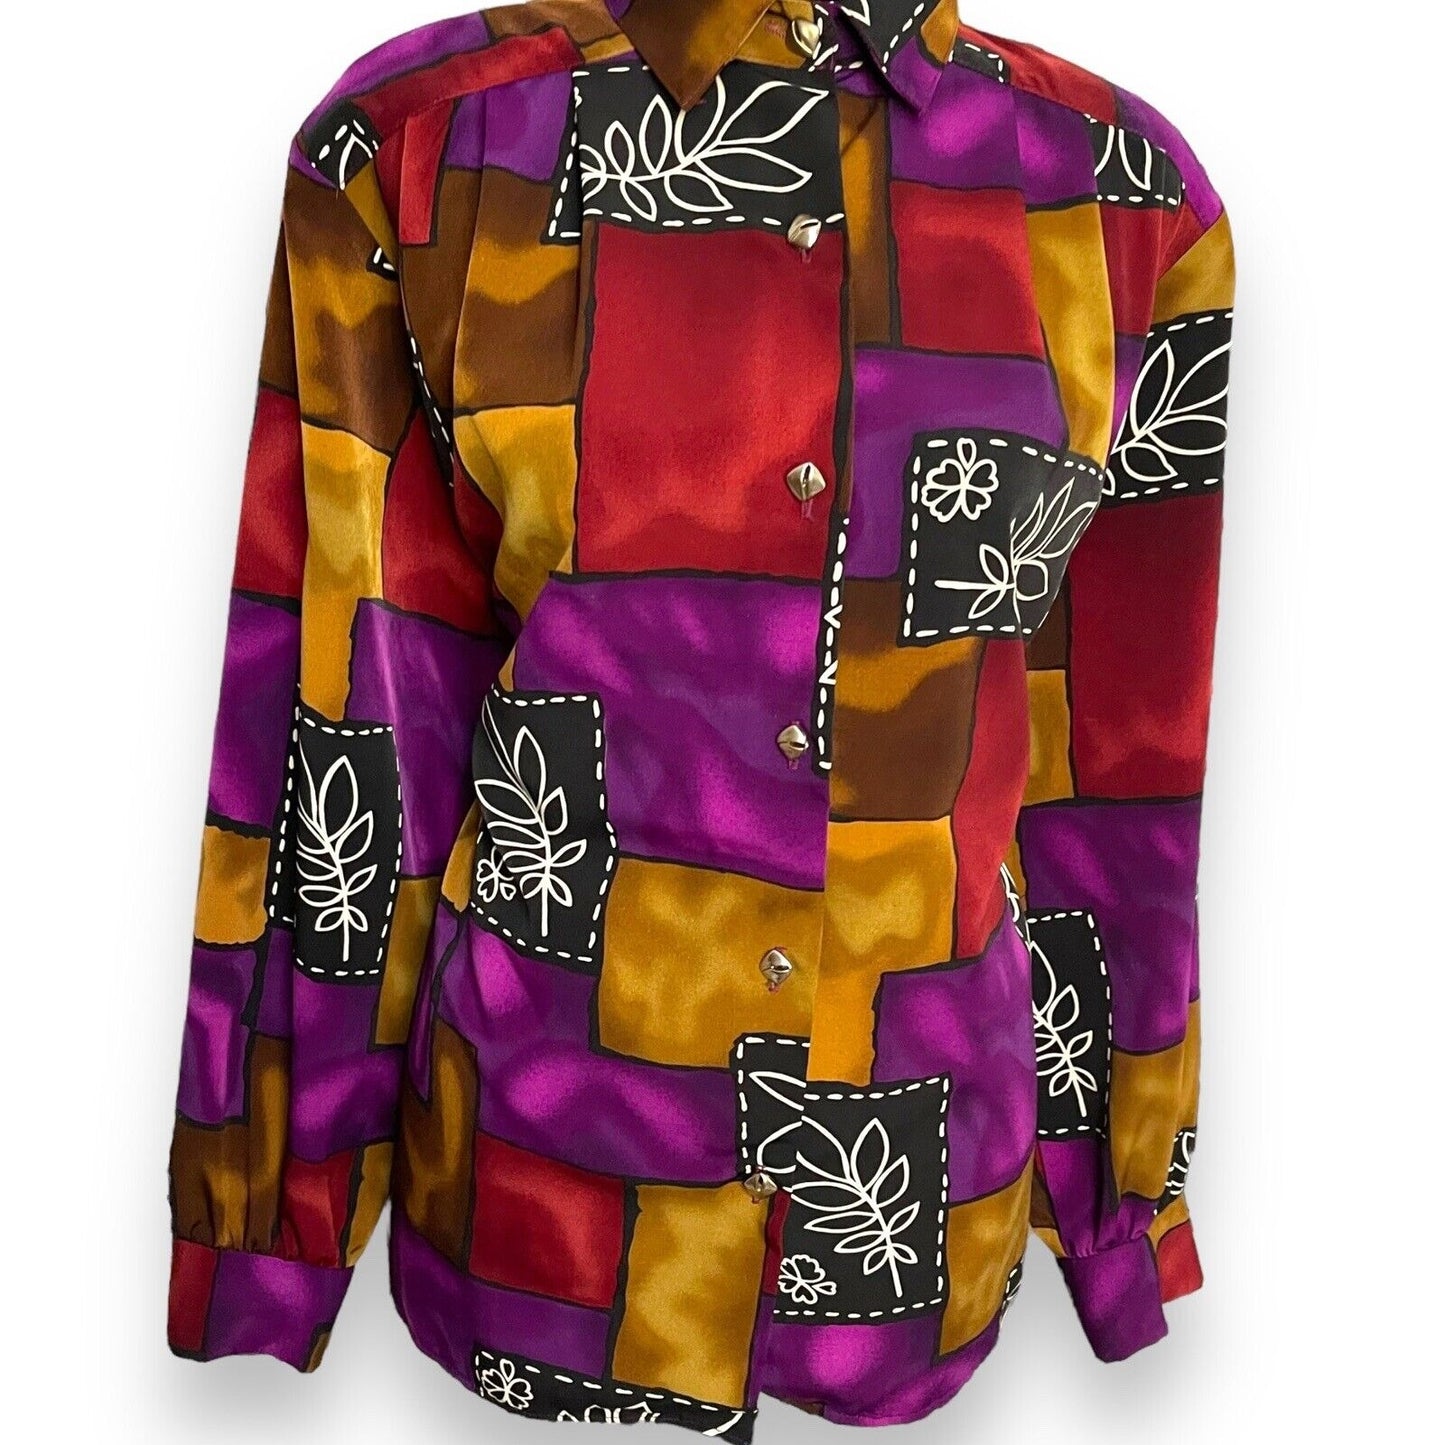 Maggie Sweet Button Up Shirt Women's Small Multicolor Patchwork Colorblock VTG